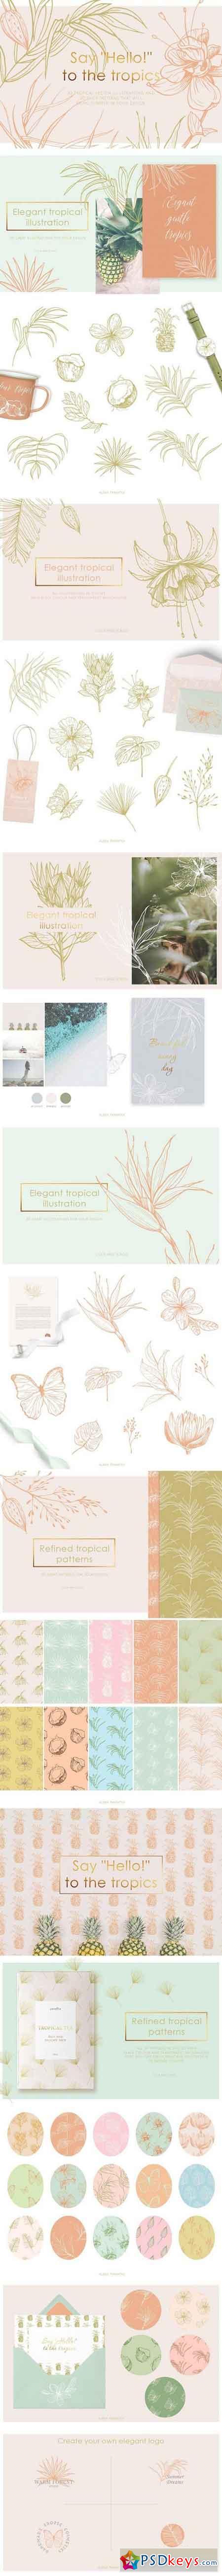 Tropical illustrations and patterns 2401904